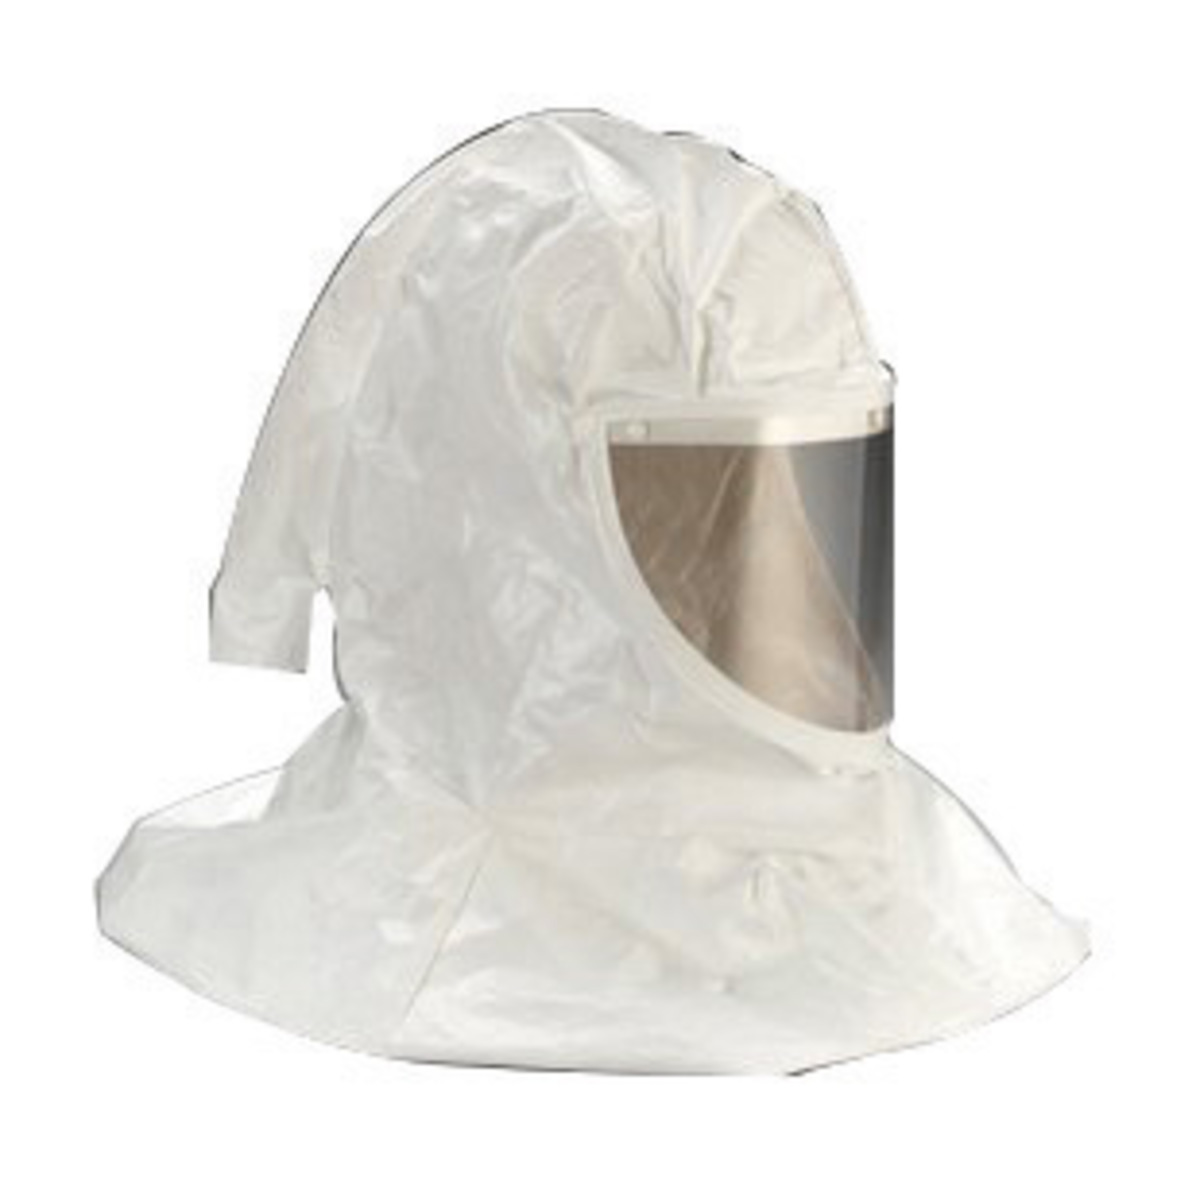 3M™ Standard H-Series White Hood Assembly With Inner Shroud And Hard Hat (Includes Hood, Faceshield Cover, Hatshell, Suspension,